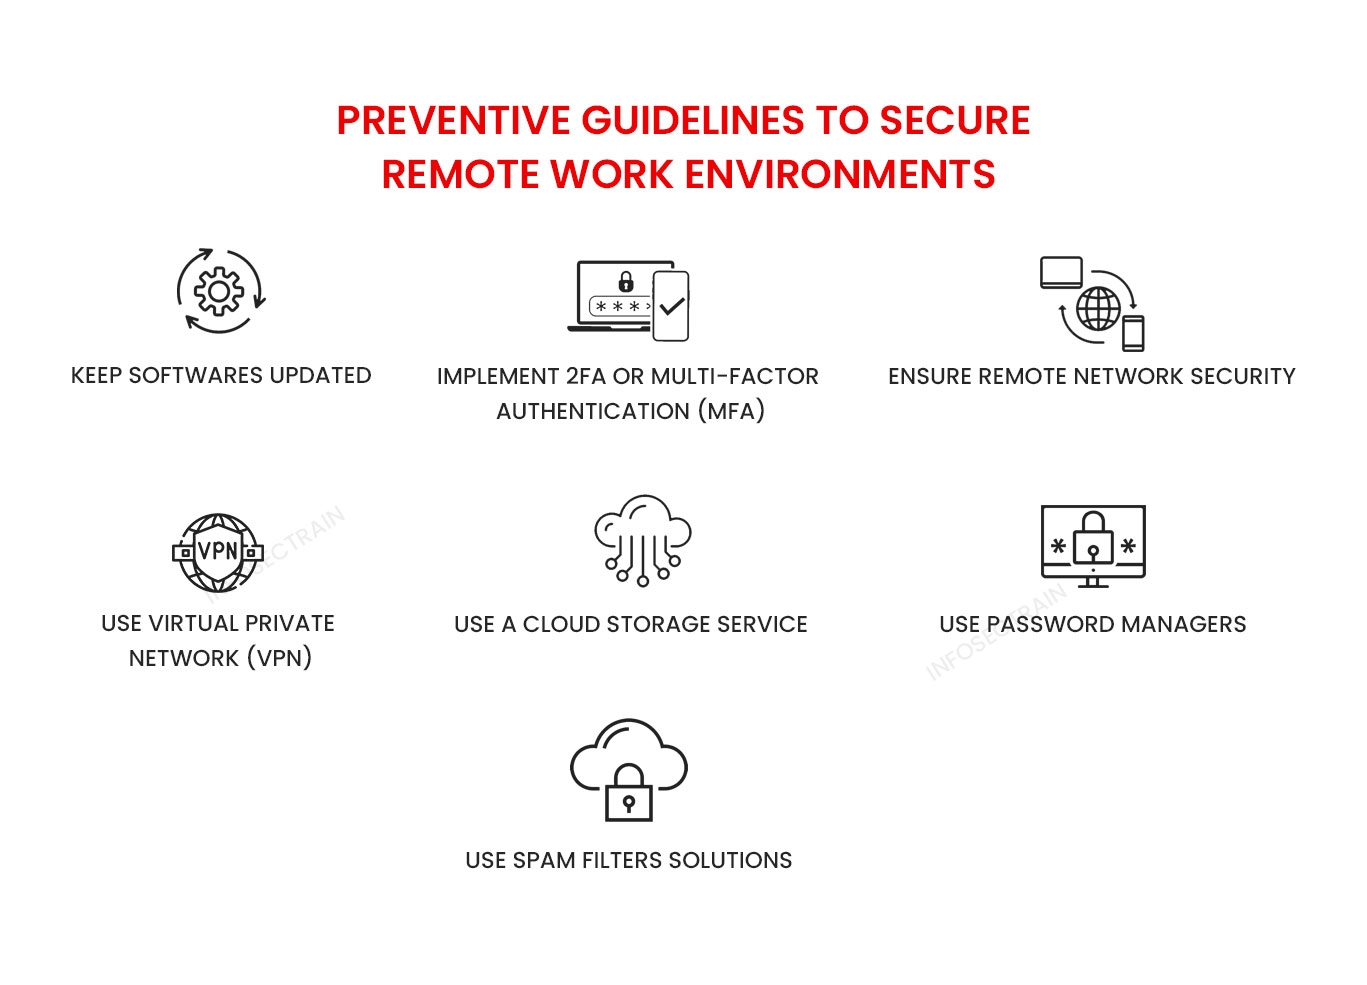 Security considerations for remote users